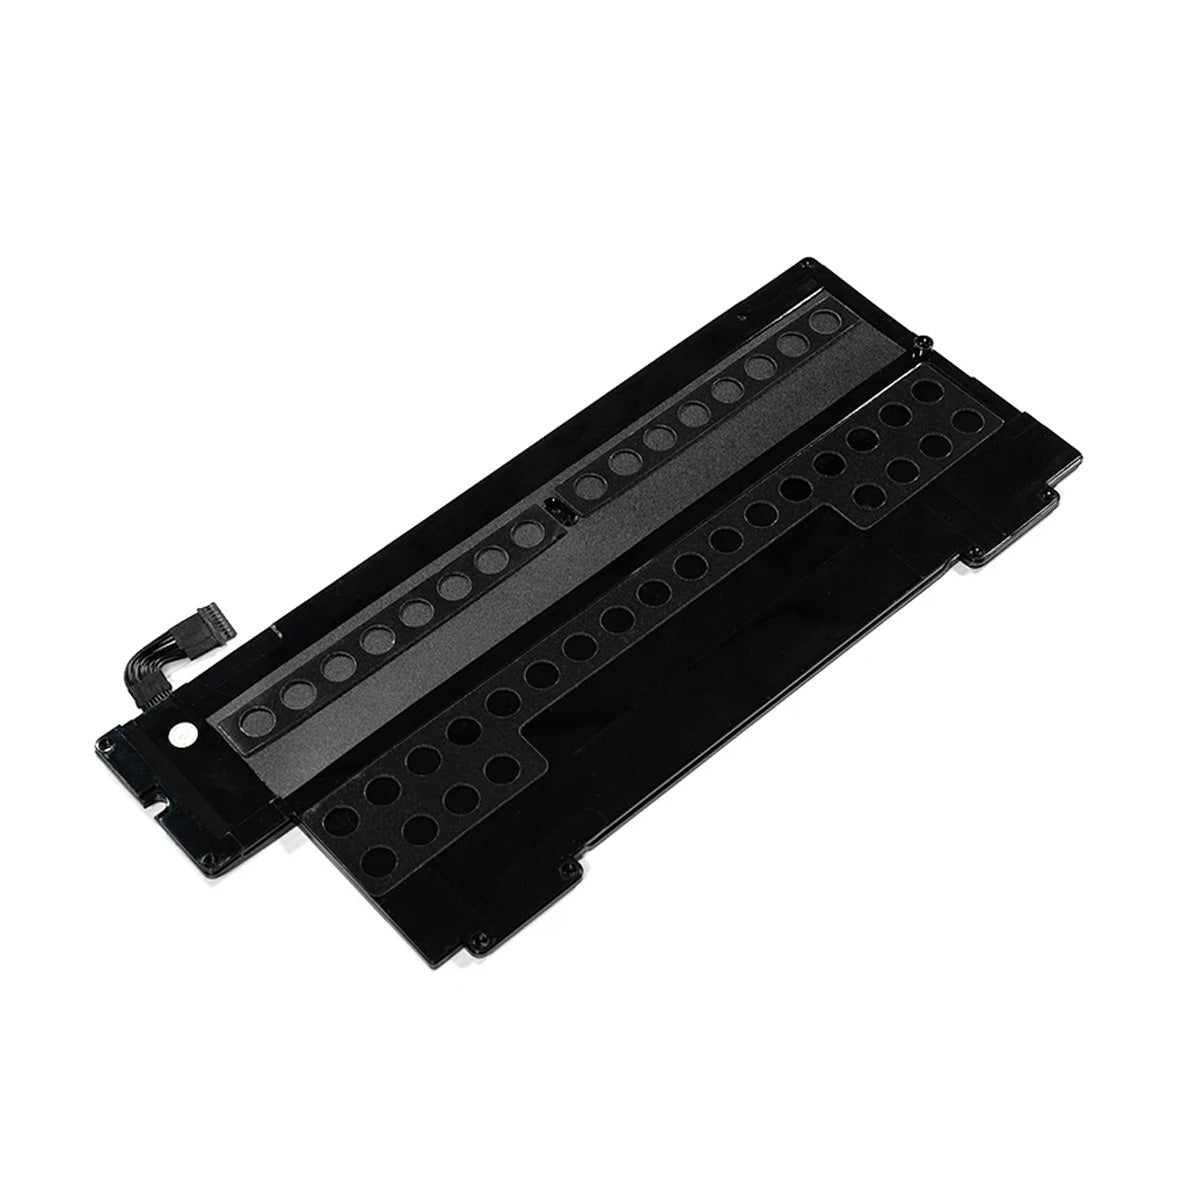 GBOLE z Brand NEW For Macbook Air 13" A1245 A1304 A1237 2008 2009 Year Laptop Battery